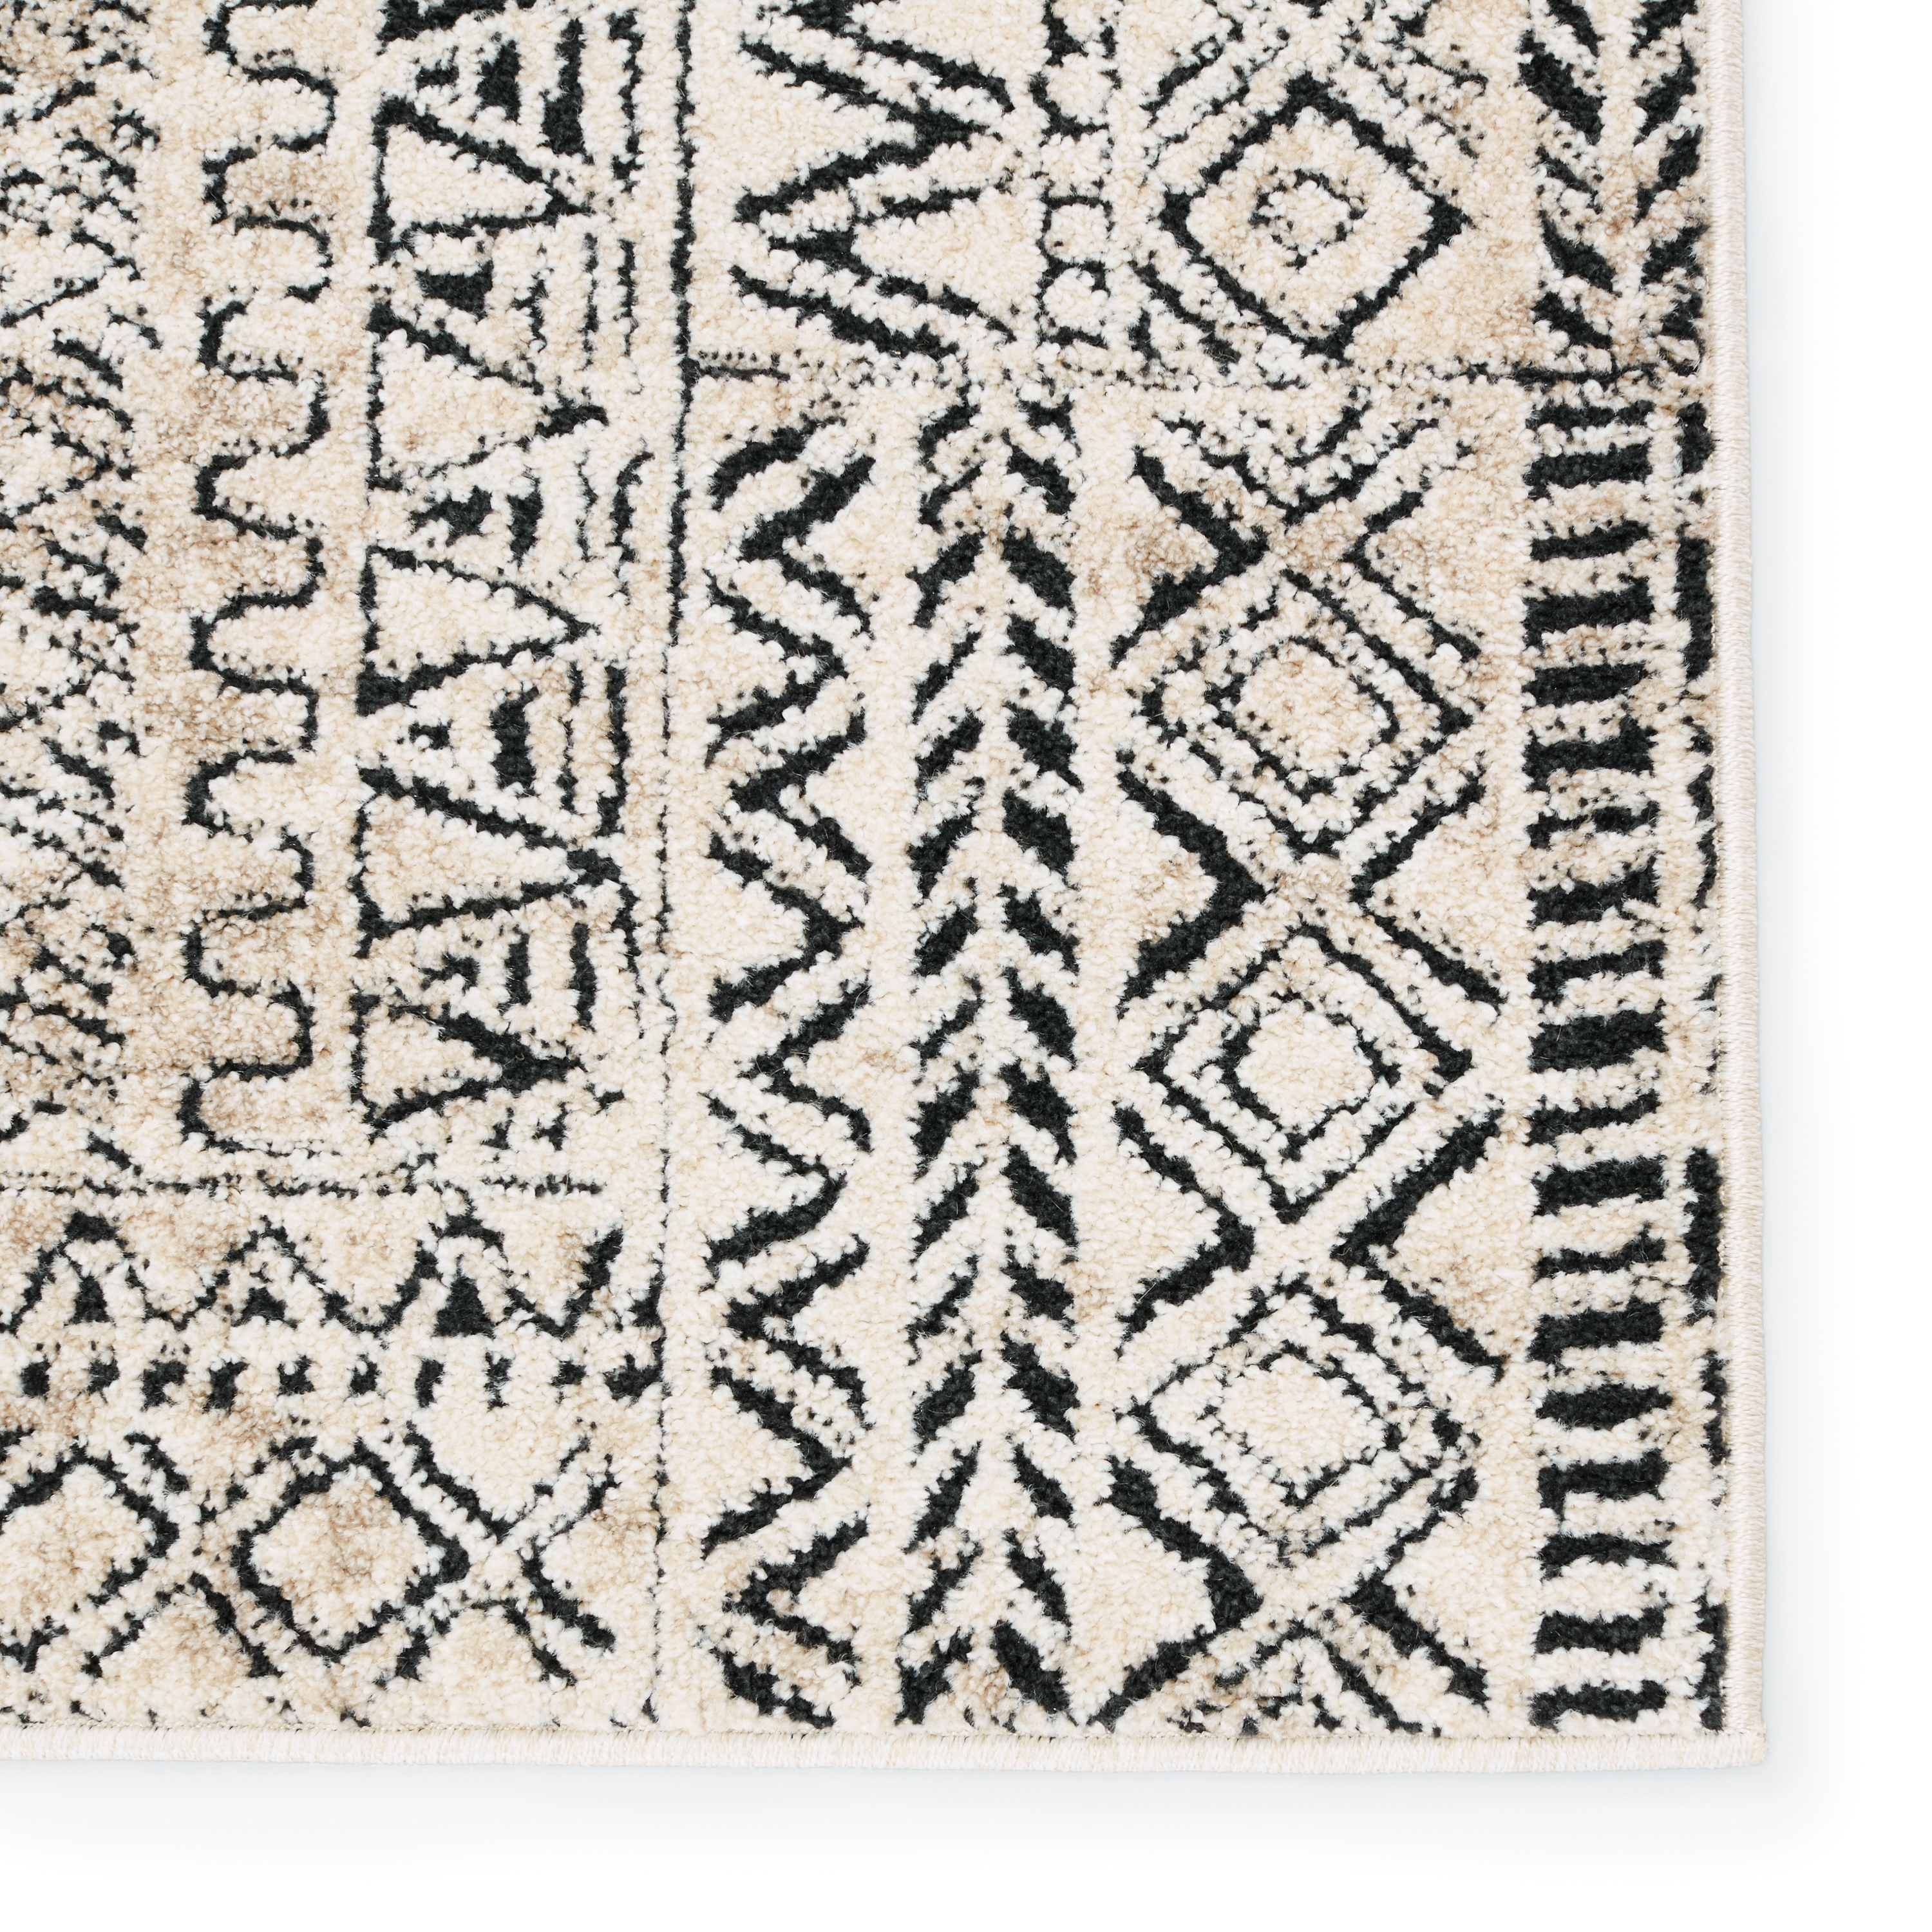 Vibe by Cyler Tribal Cream/ Black Area Rug (9'2"X13') - Image 3